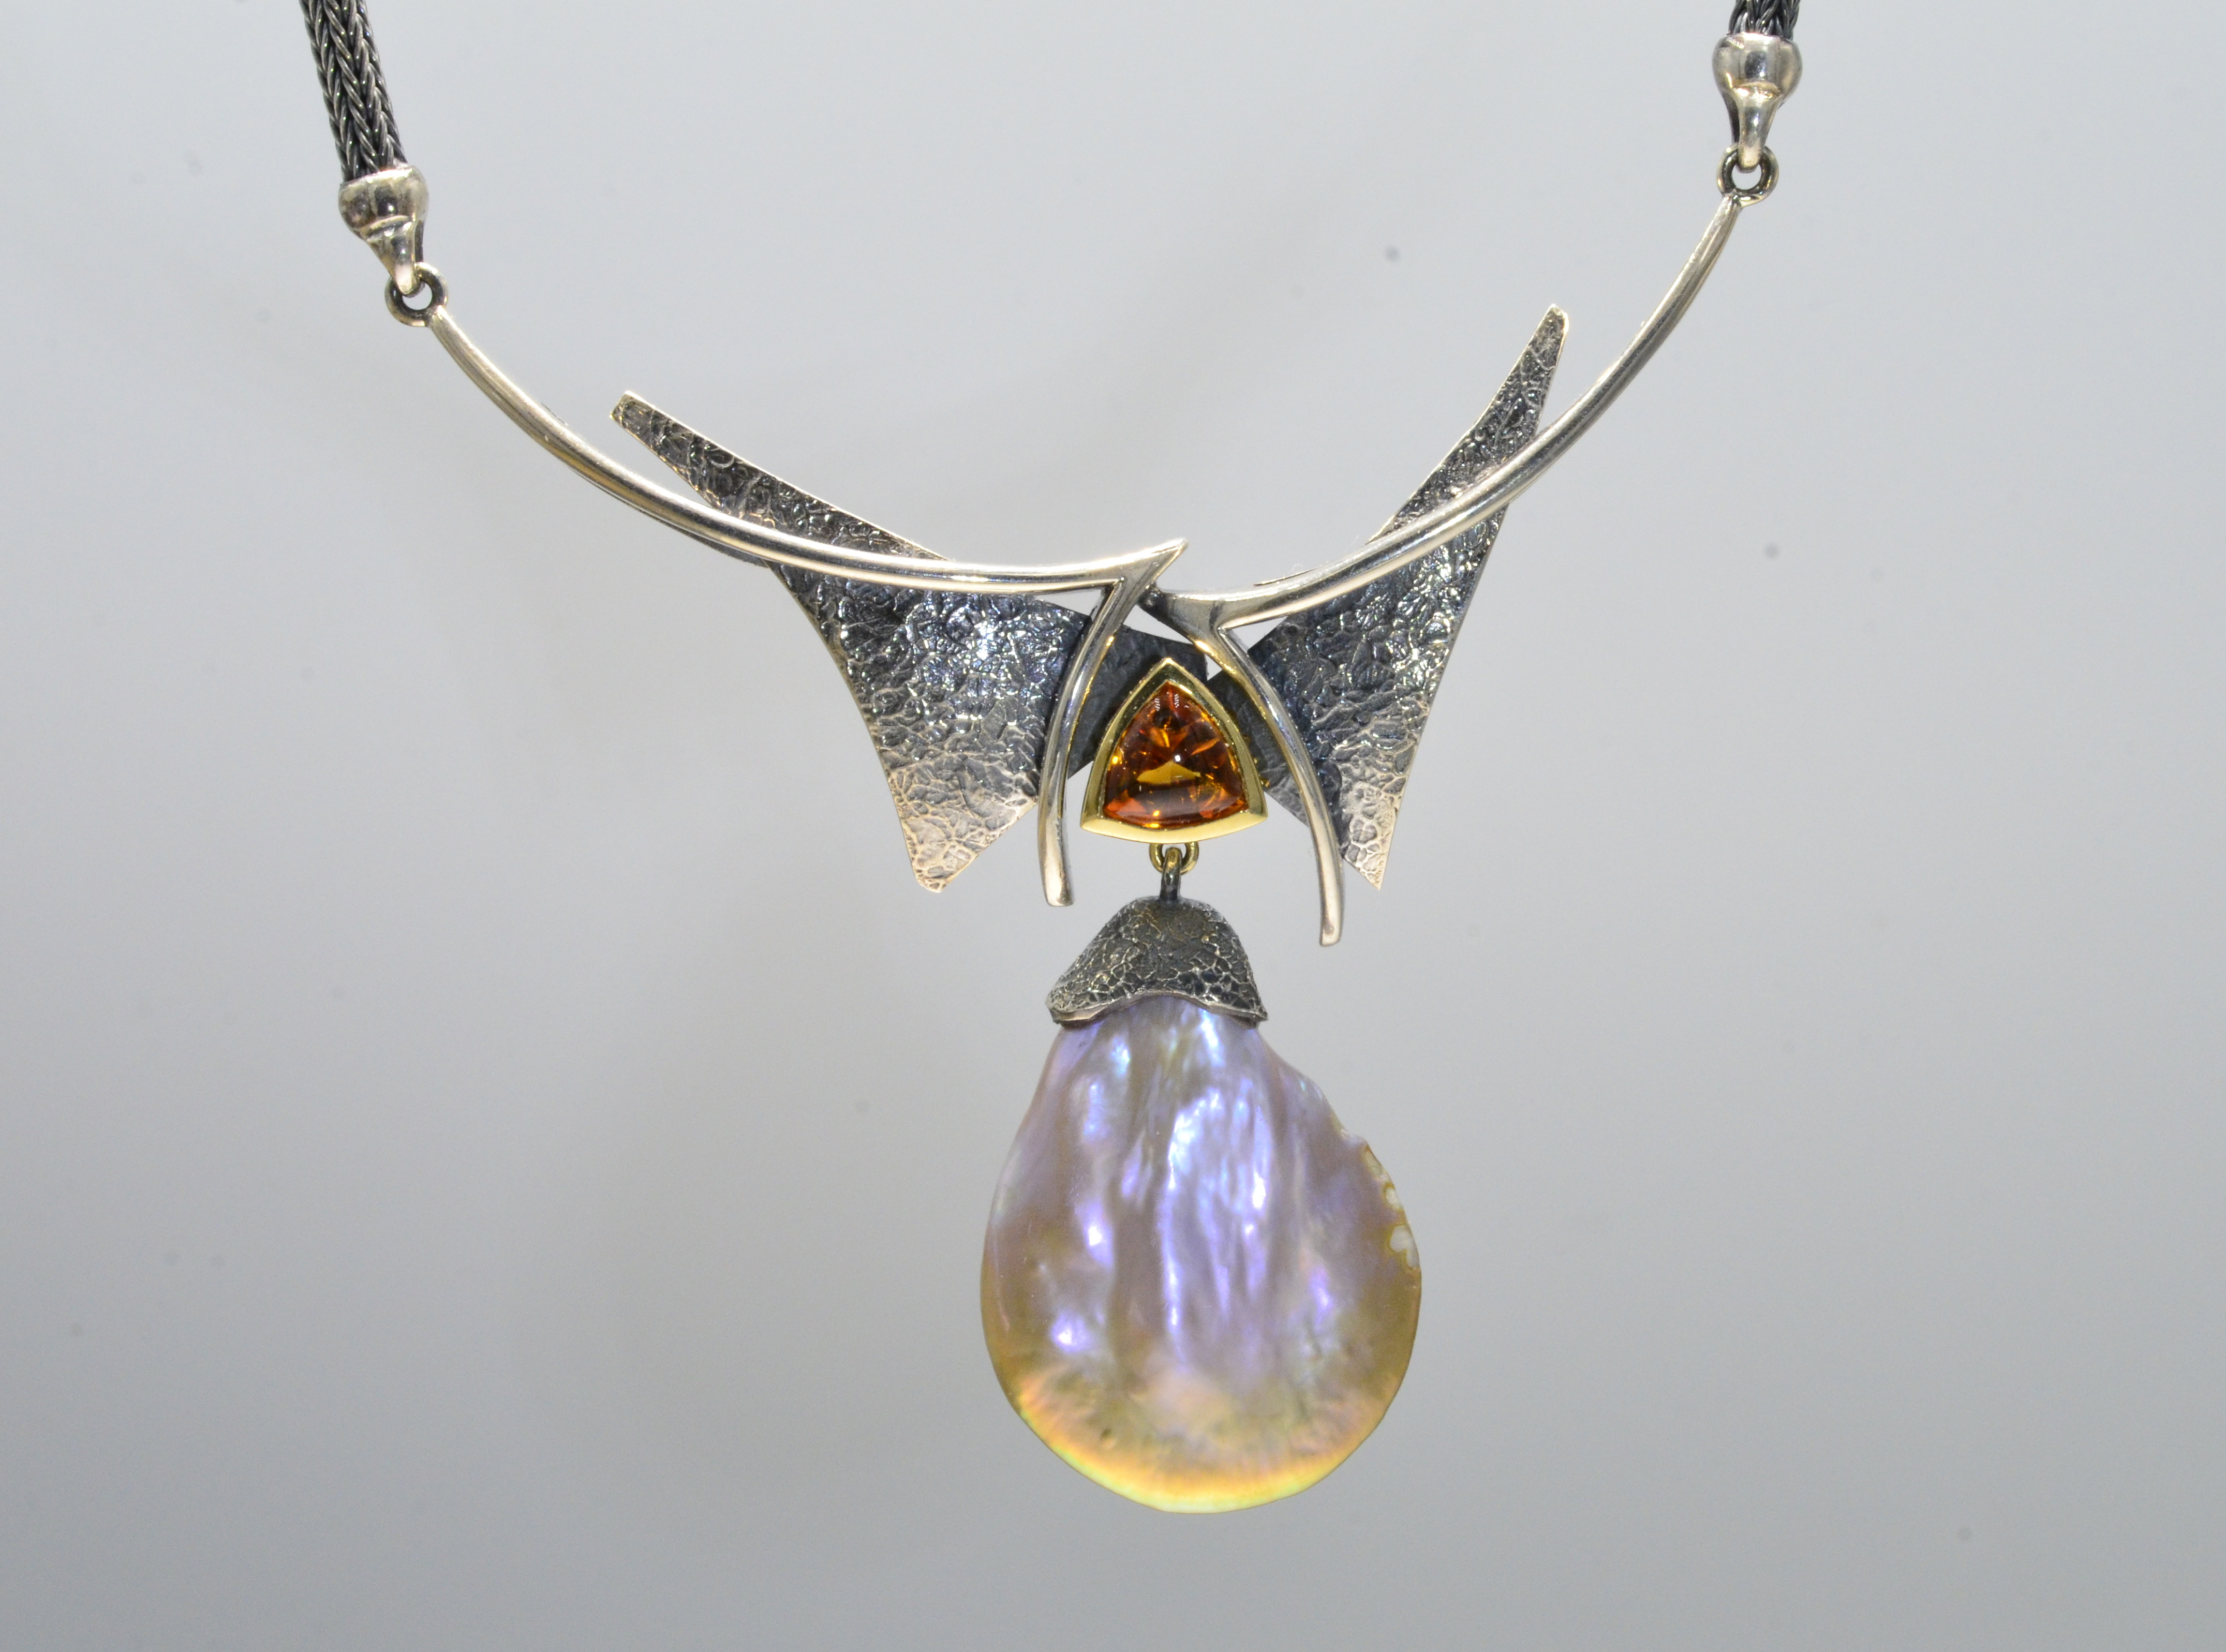 Multi Angular Pendant. The Freshwater Pearl has a soft Pink/Rose sheen. The Citrine is smooth on top and faceted on the bottom half creating a glowing orange Characteristic. Width 2.3/4 " Height 2.25 ".  Width of chain 3.5 mm and attached to the Pendant, 19"total length.